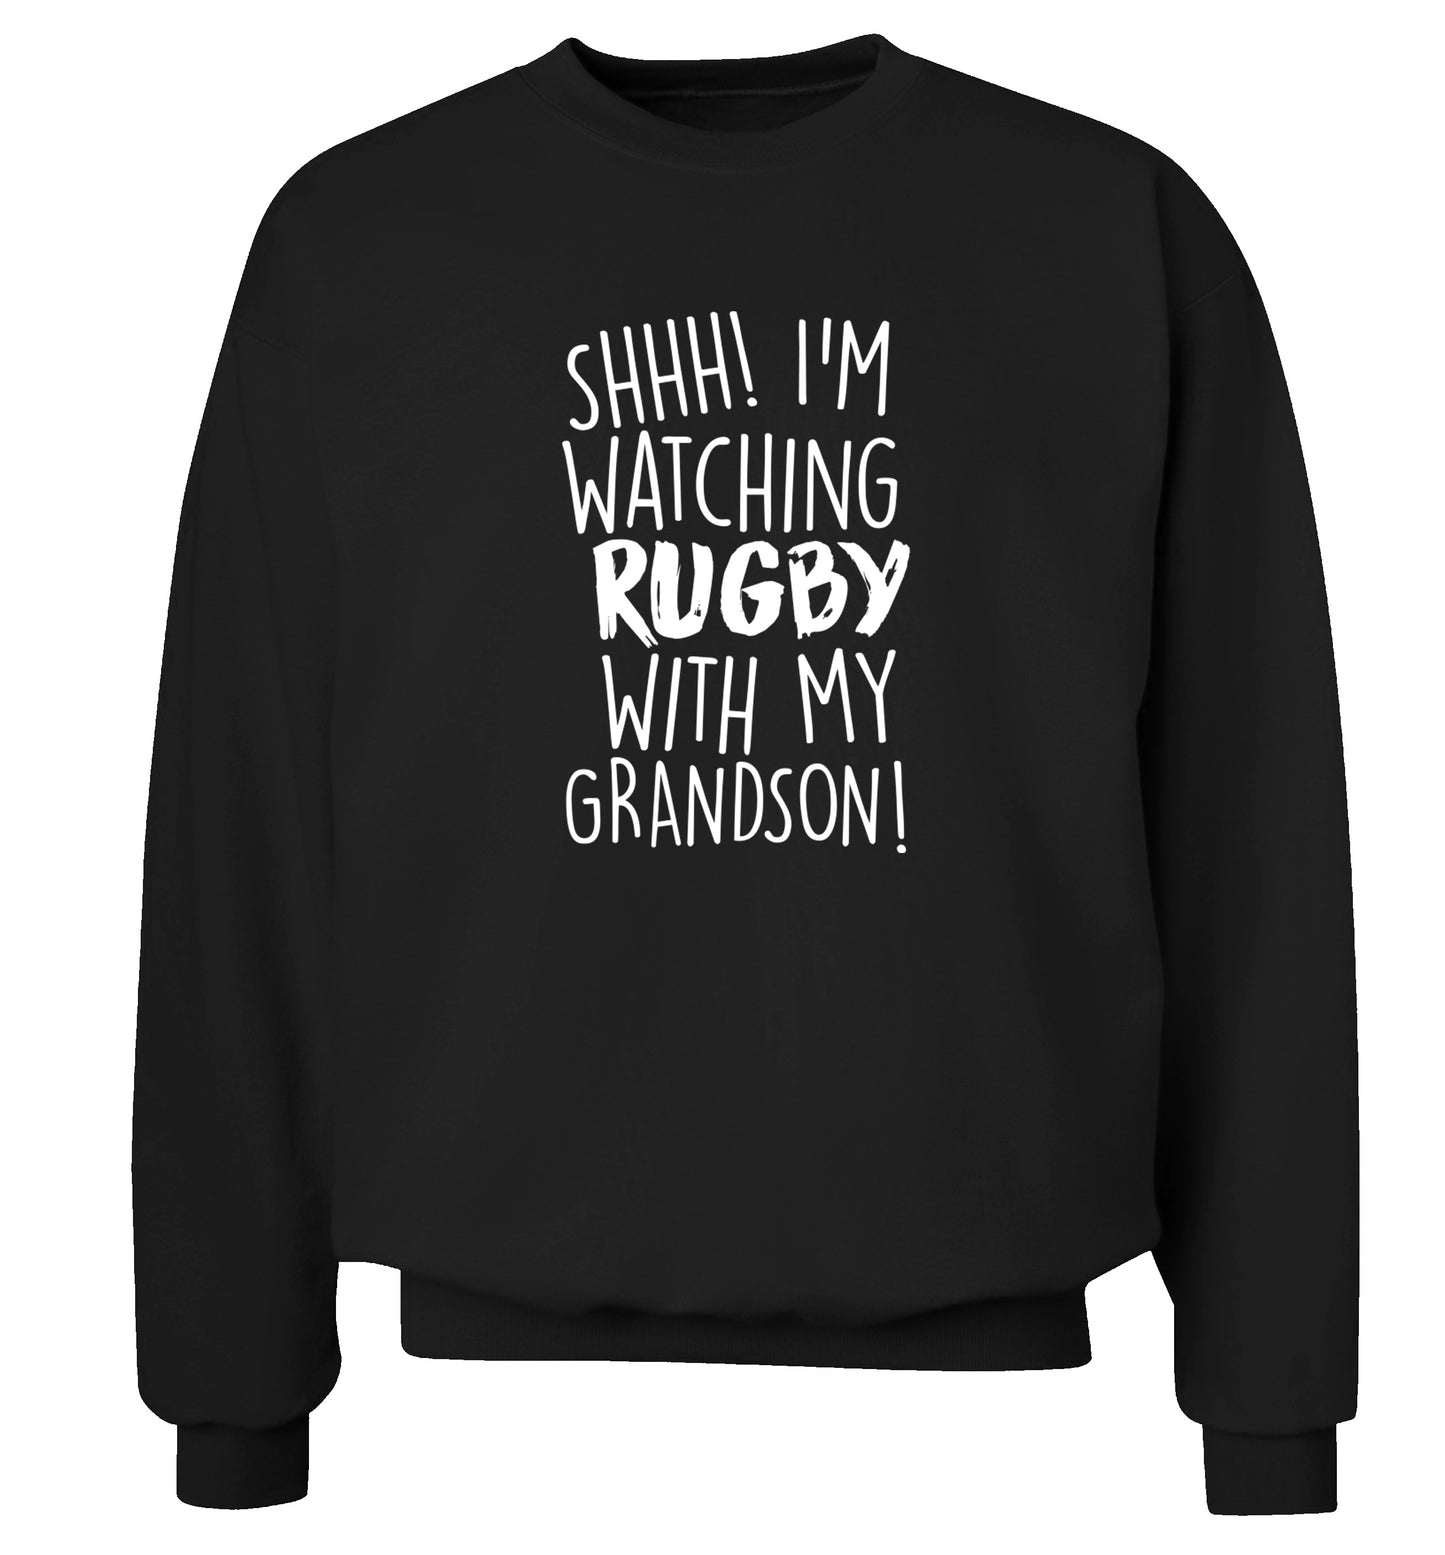 Shh I'm watching rugby with my grandson Adult's unisex black Sweater 2XL